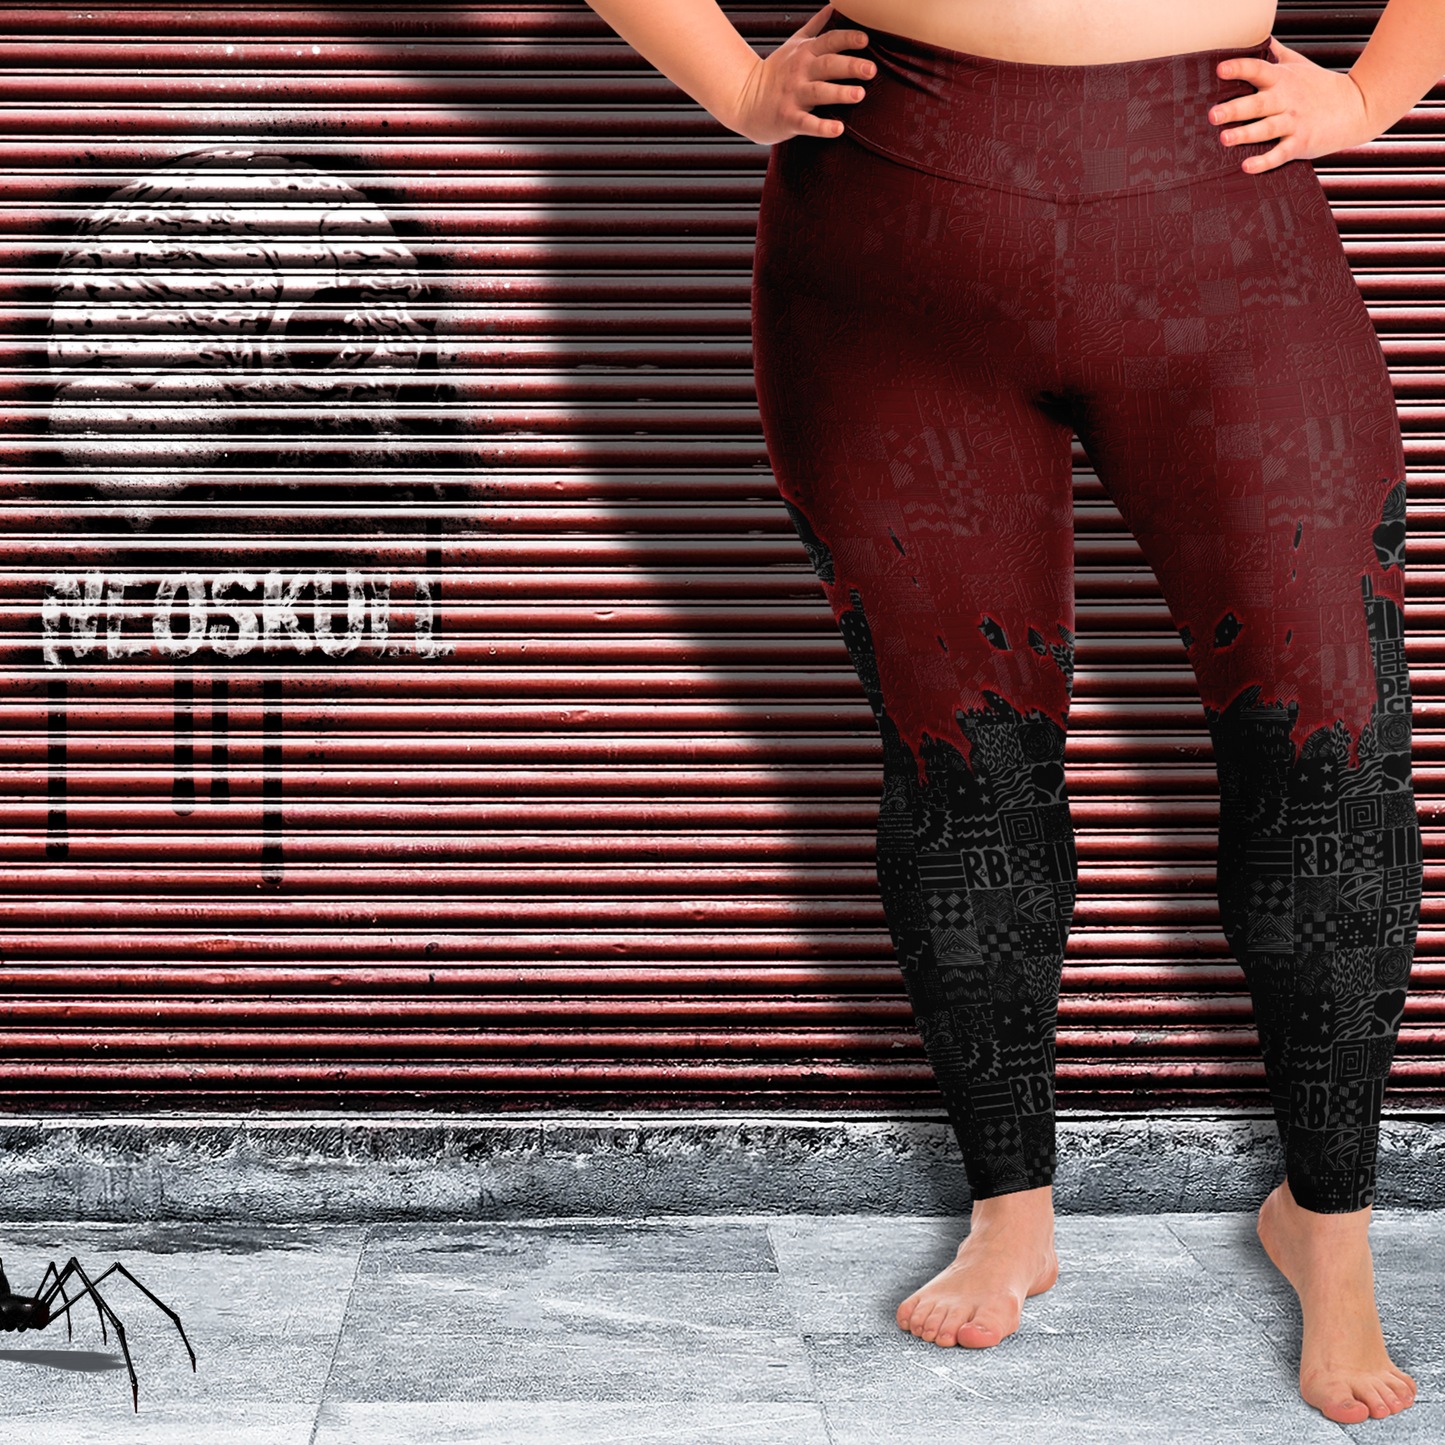 Goth Plus Size Leggings, Ruby freehand doodle style - NeoSkull